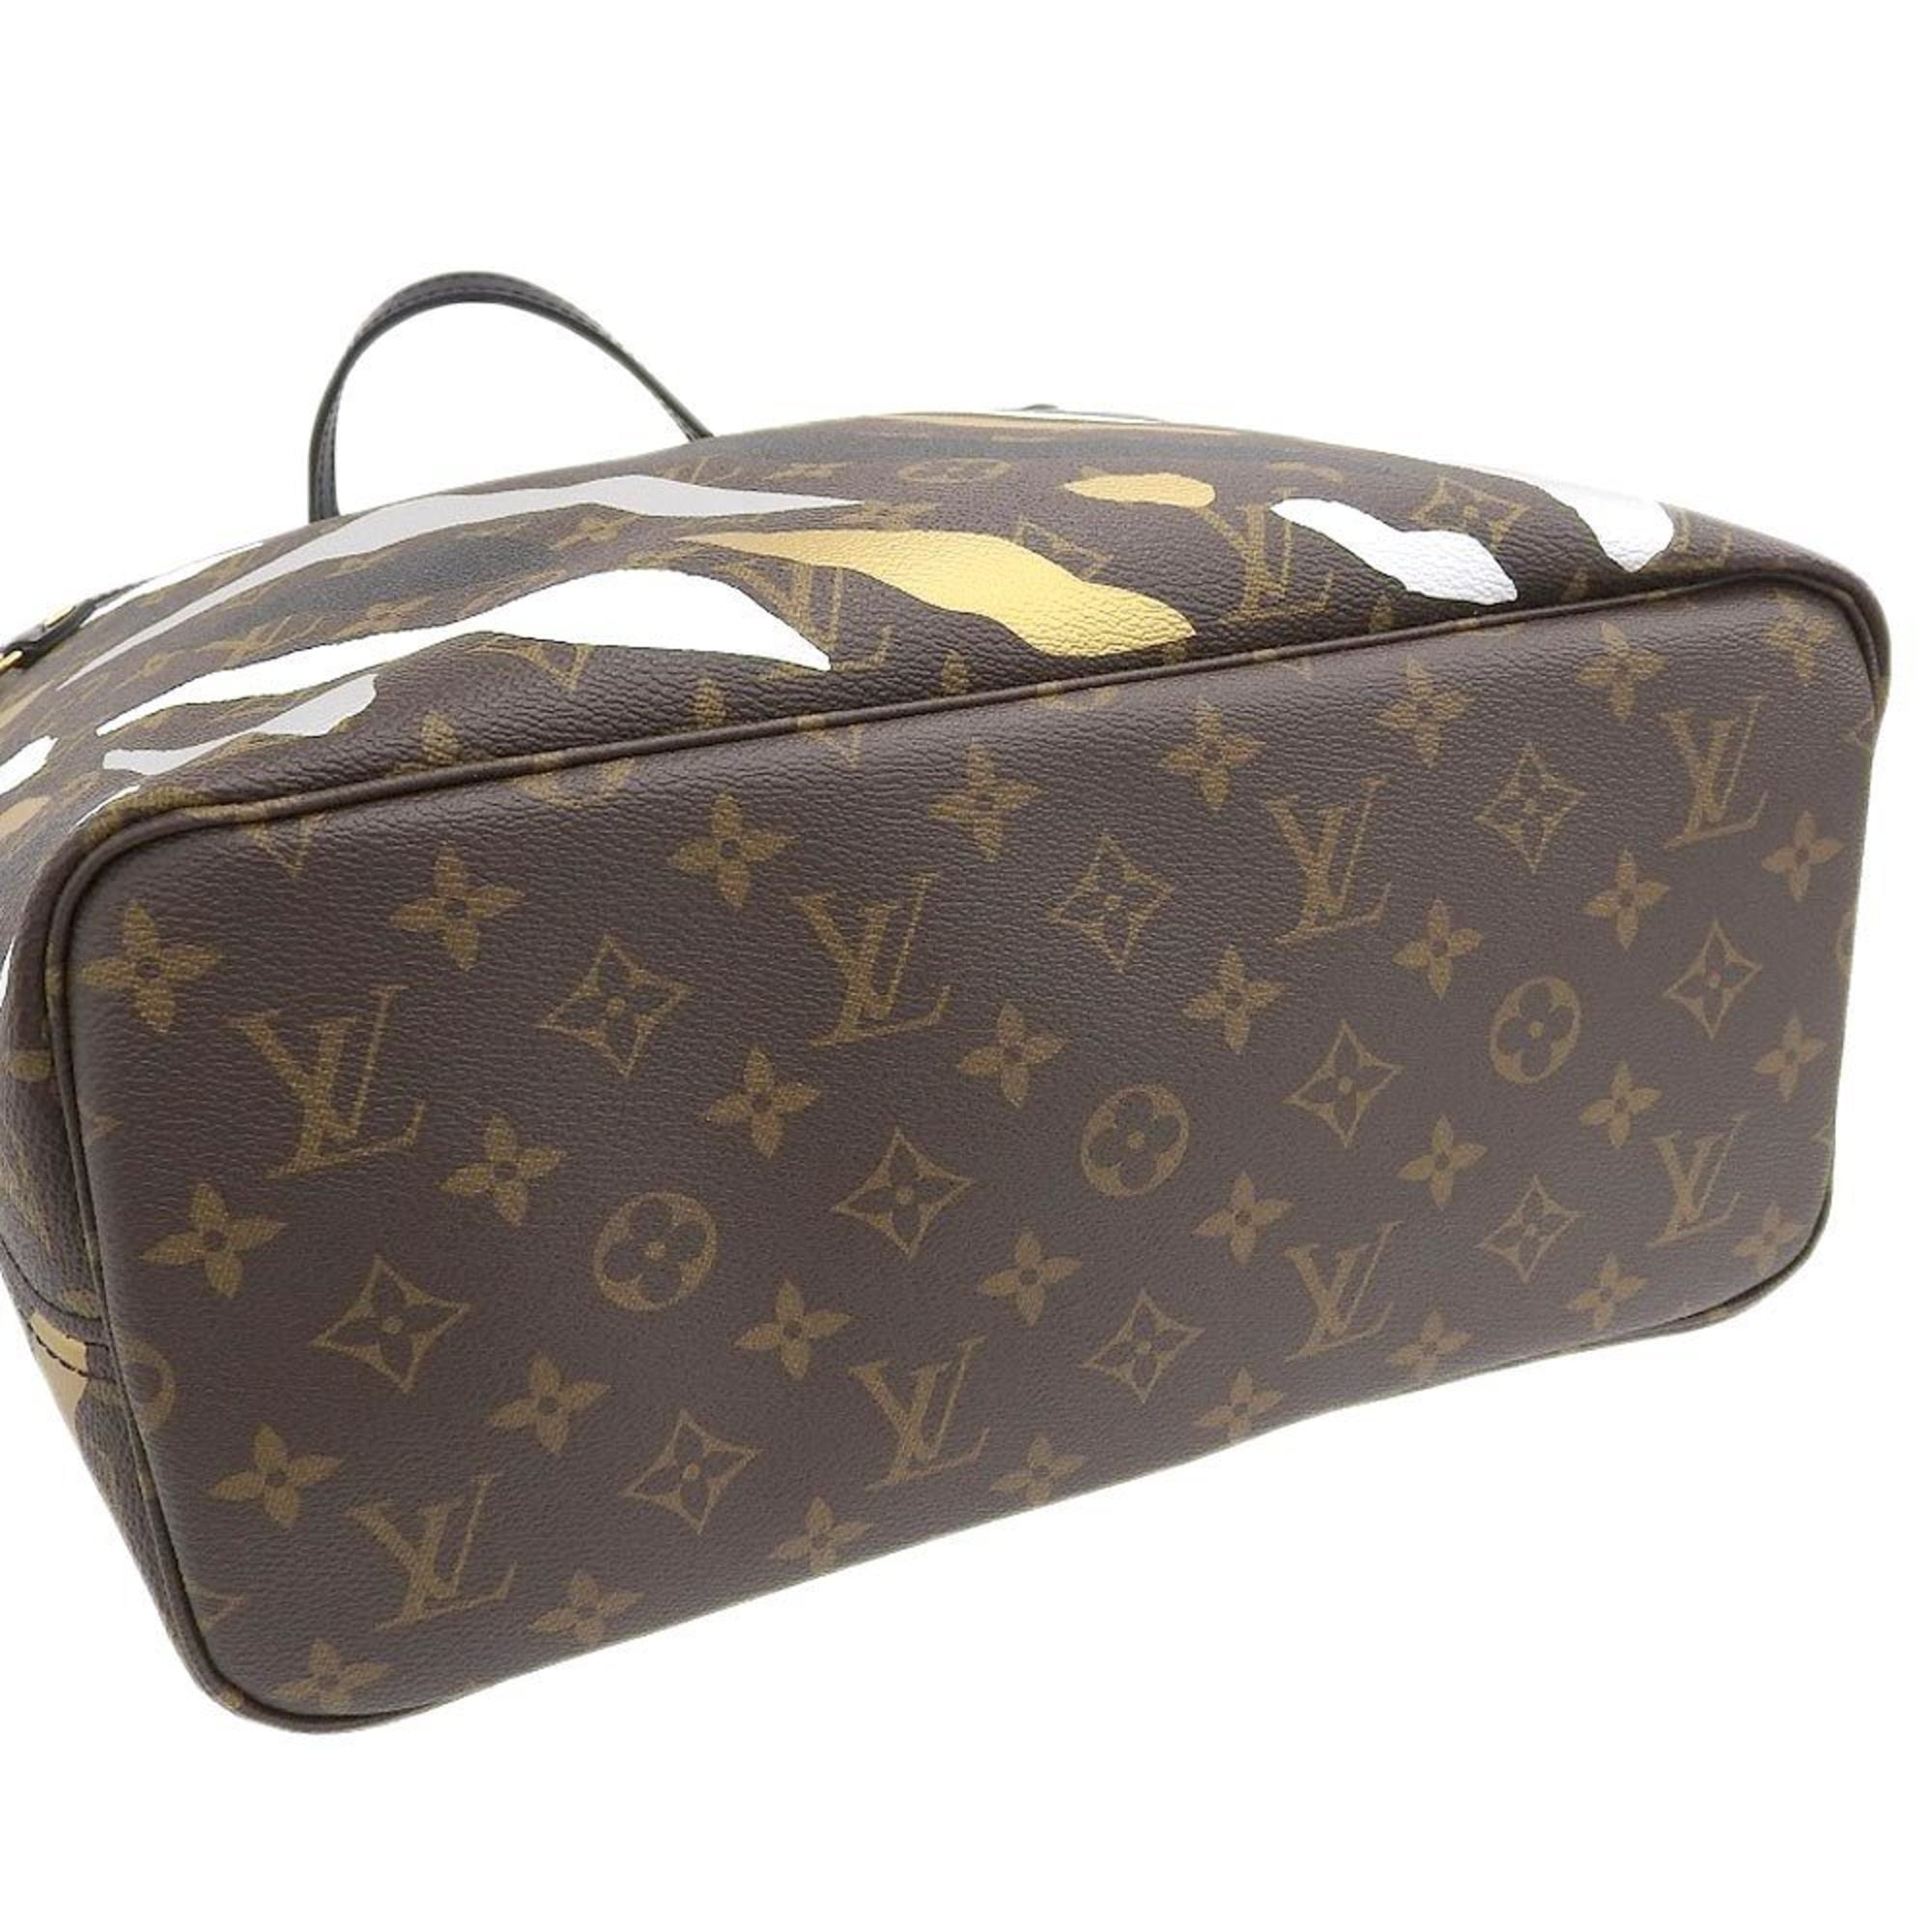 LOUIS VUITTON × LOL Monogram Camouflage Neverfull MM Tote Bag M45201 Auth  2